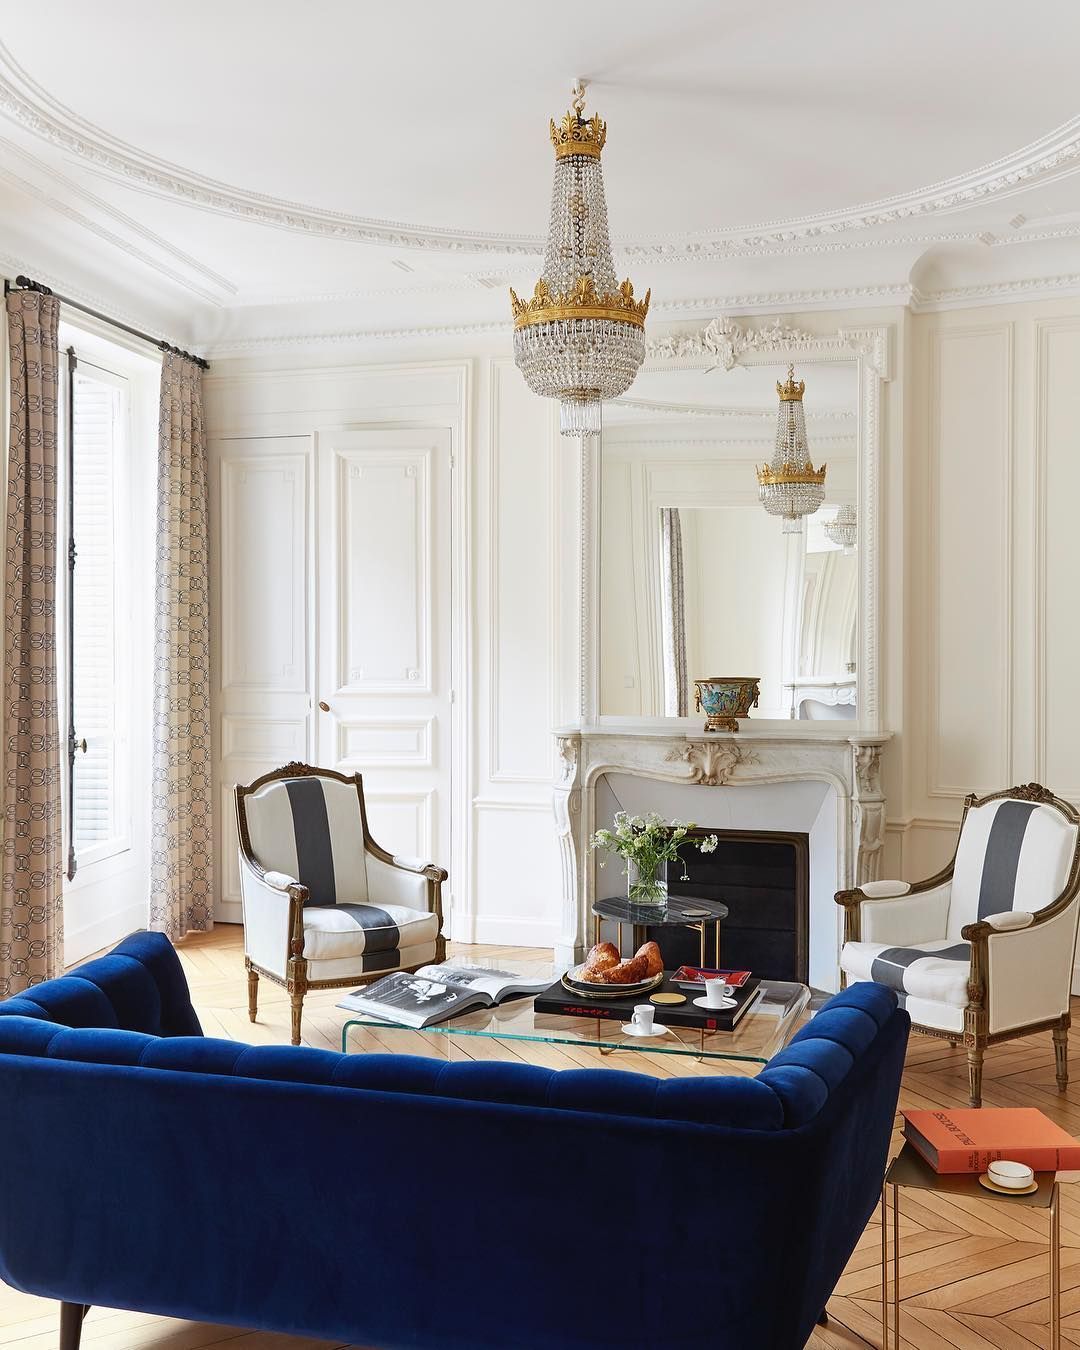 59 Parisian Living Rooms To Make You Swoon, Paris Decorations For Living Room